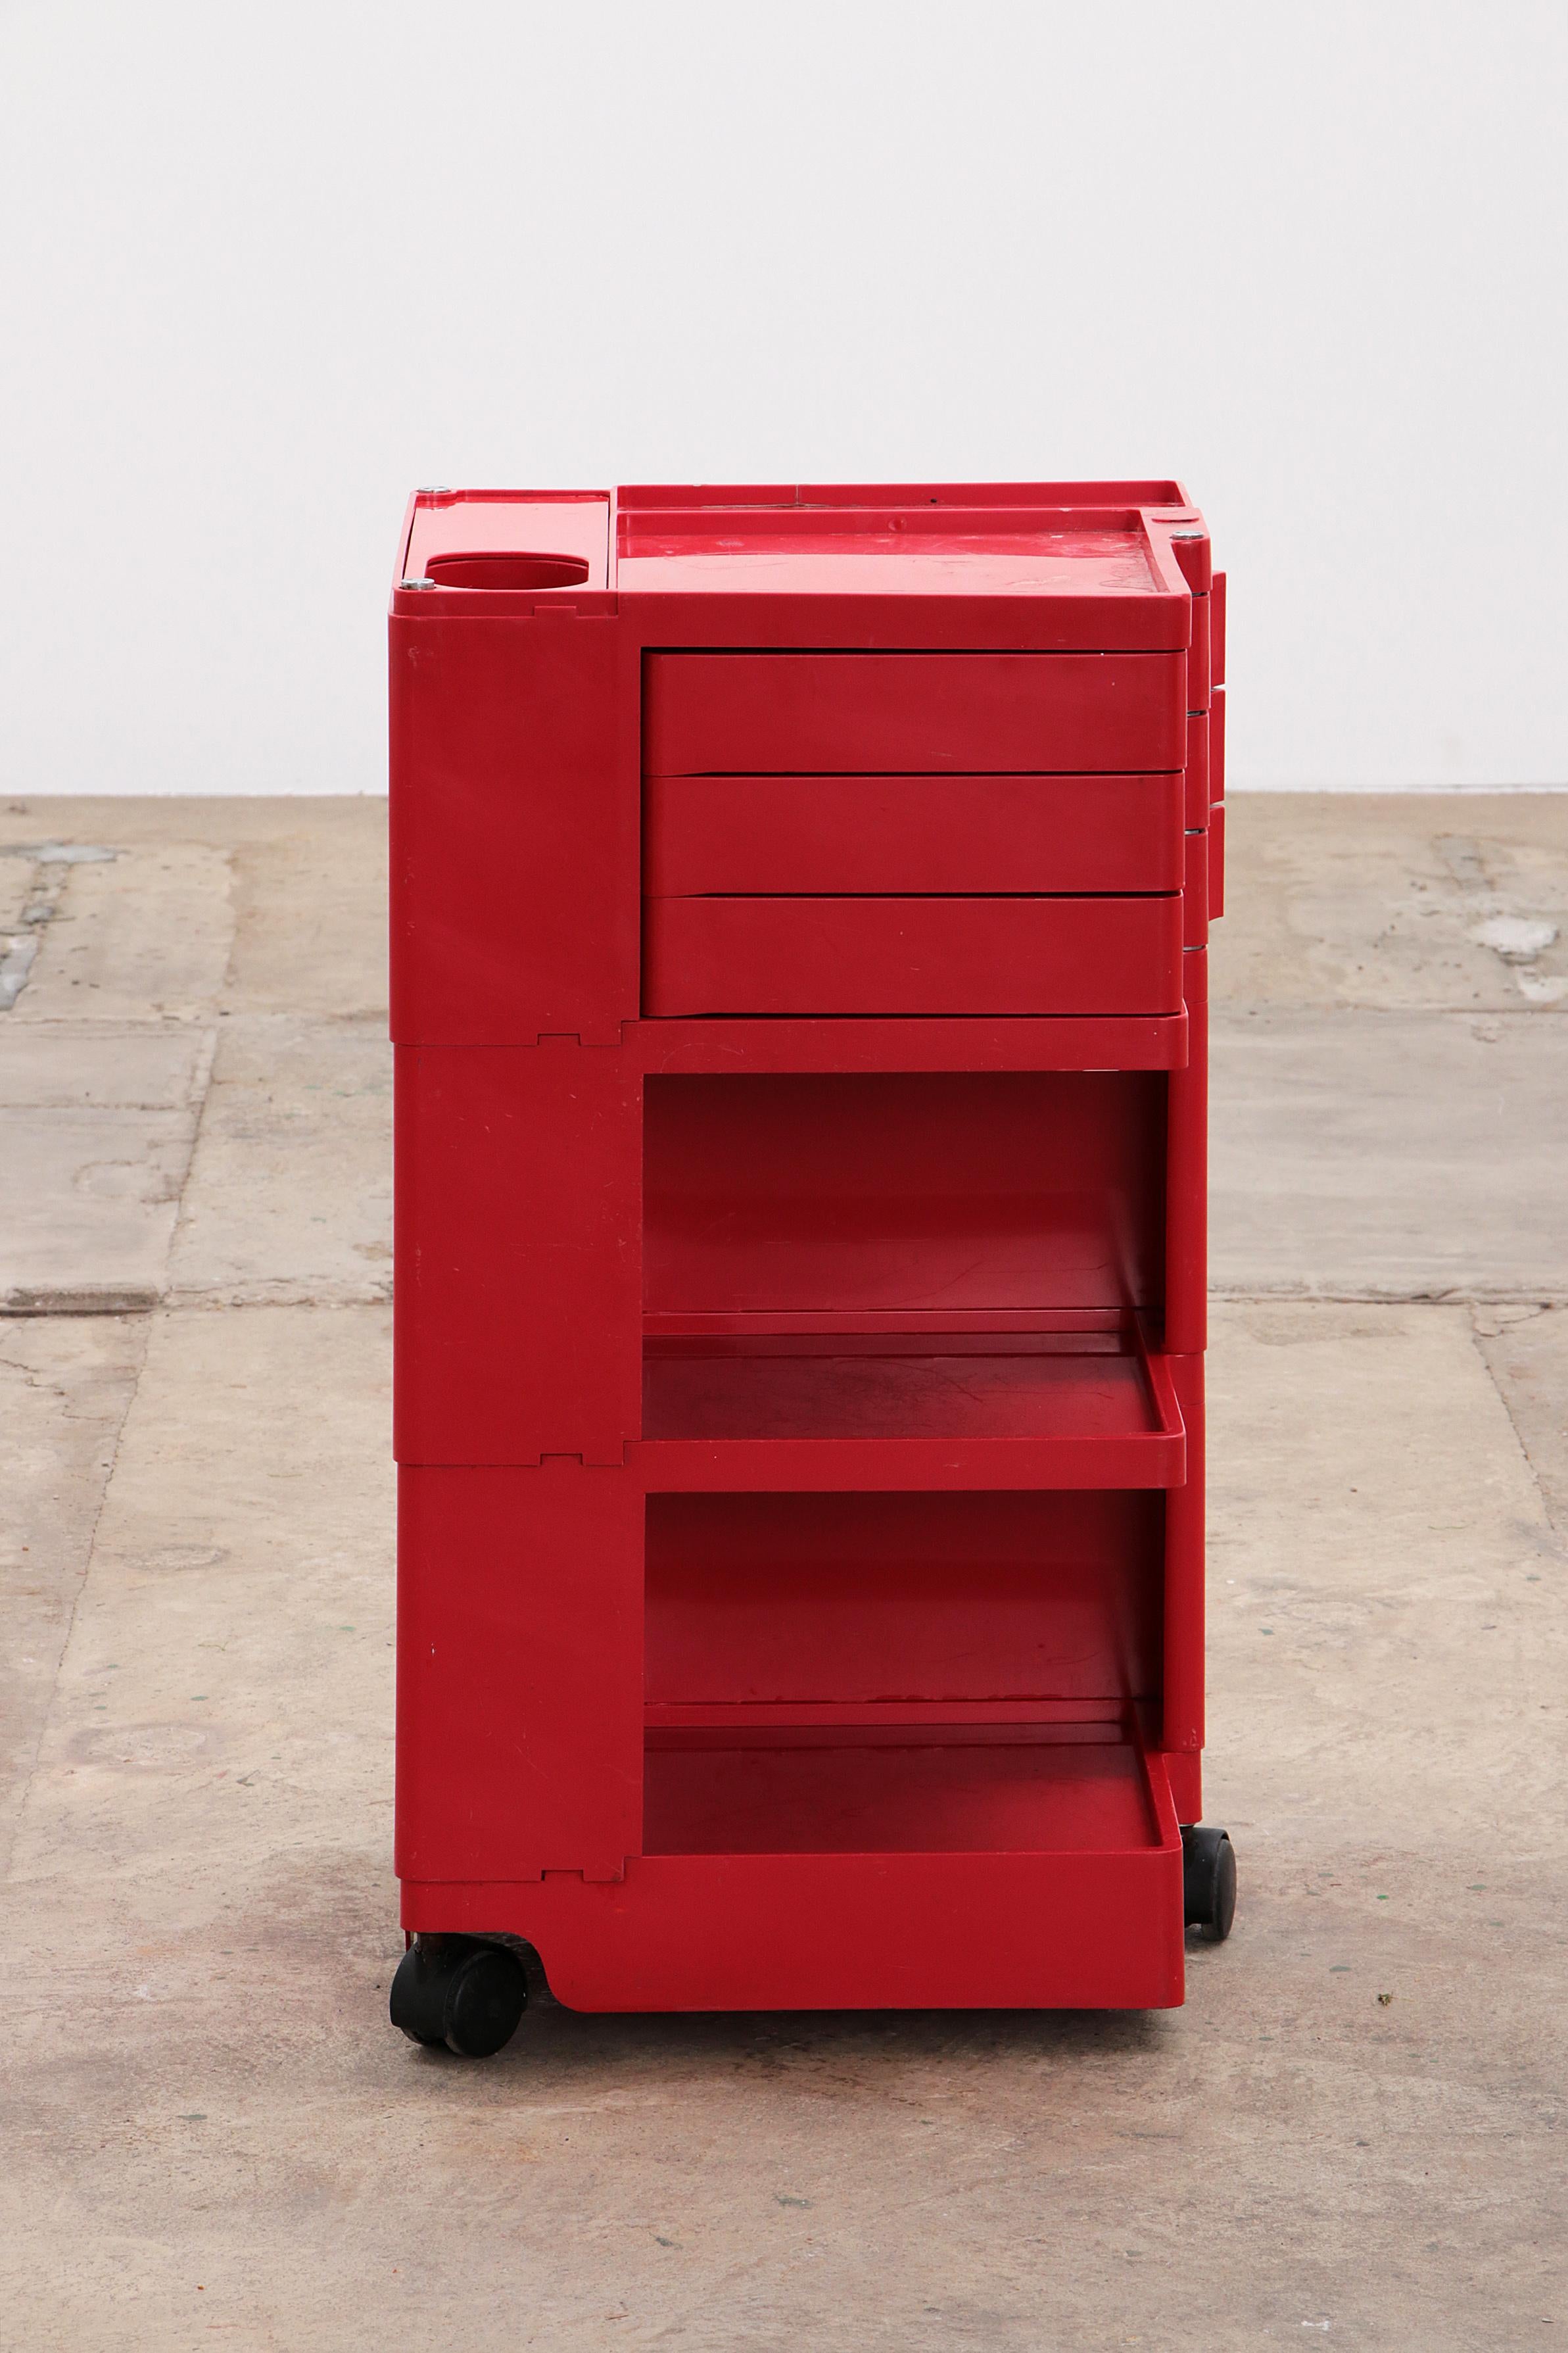 Late 20th Century Joe Columbo Iconic red Trolley 'Boby'Spage age, 1970 For Sale